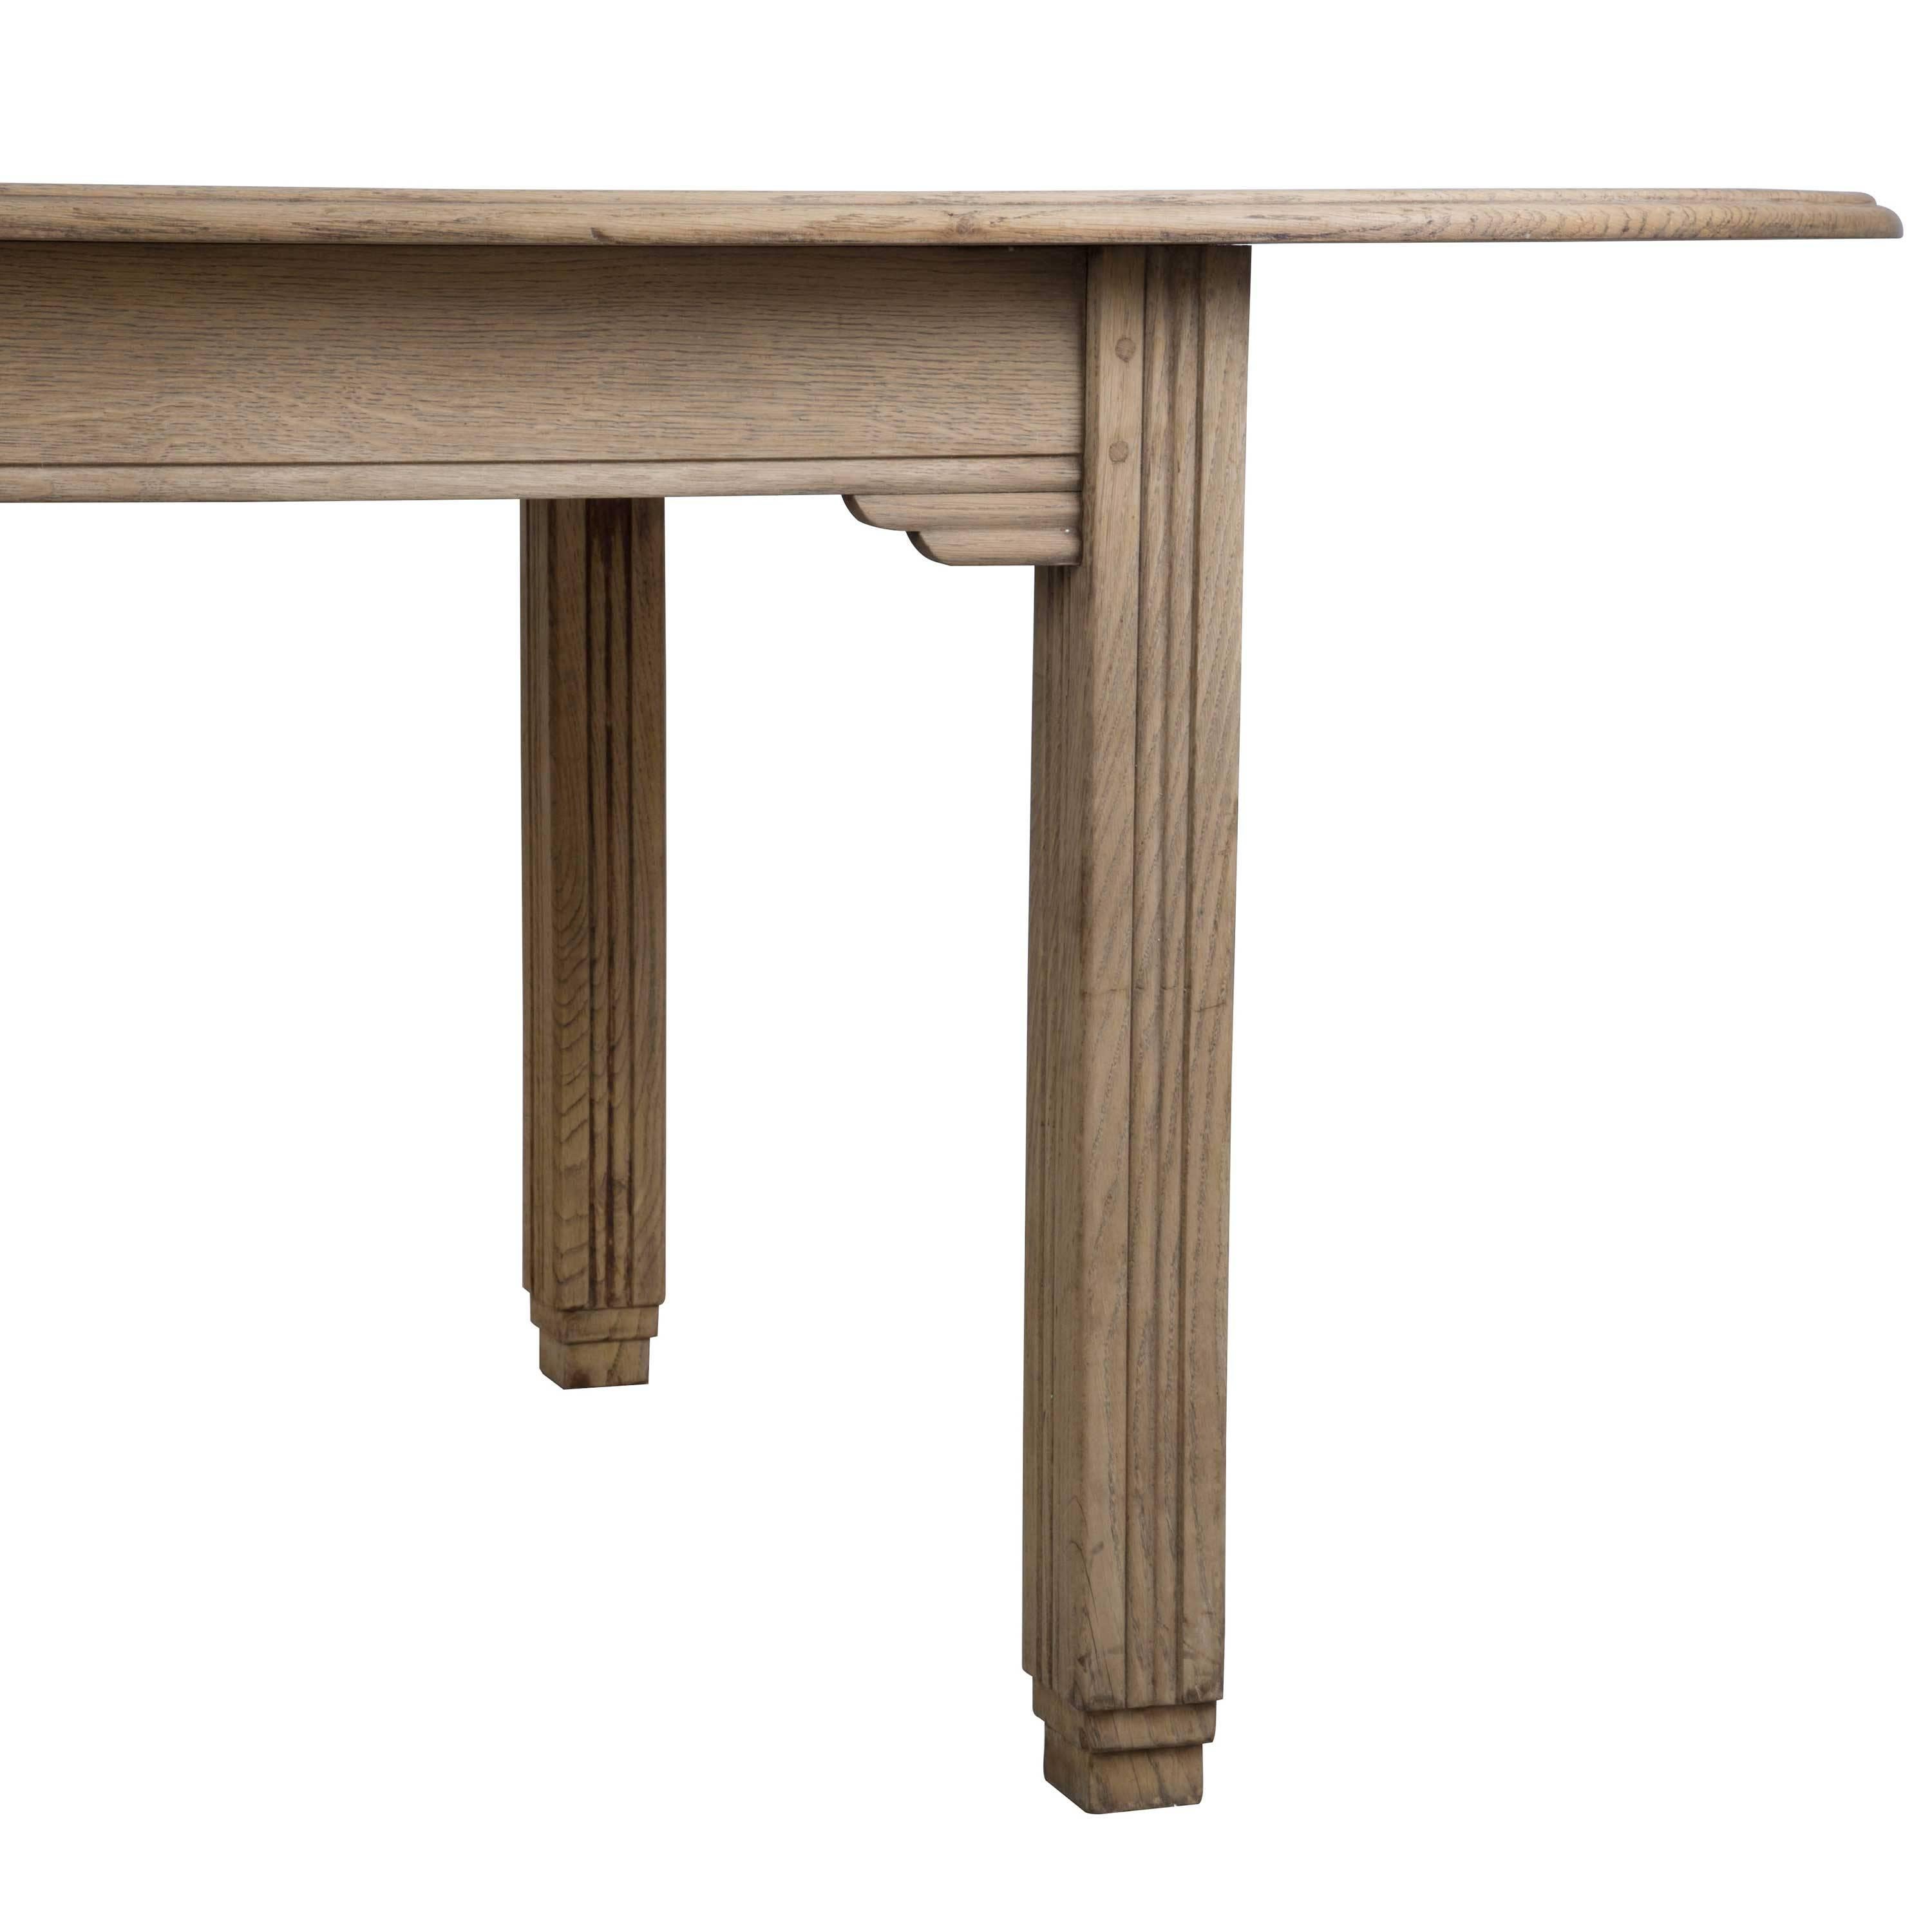 French Bleached Oak Dining Table